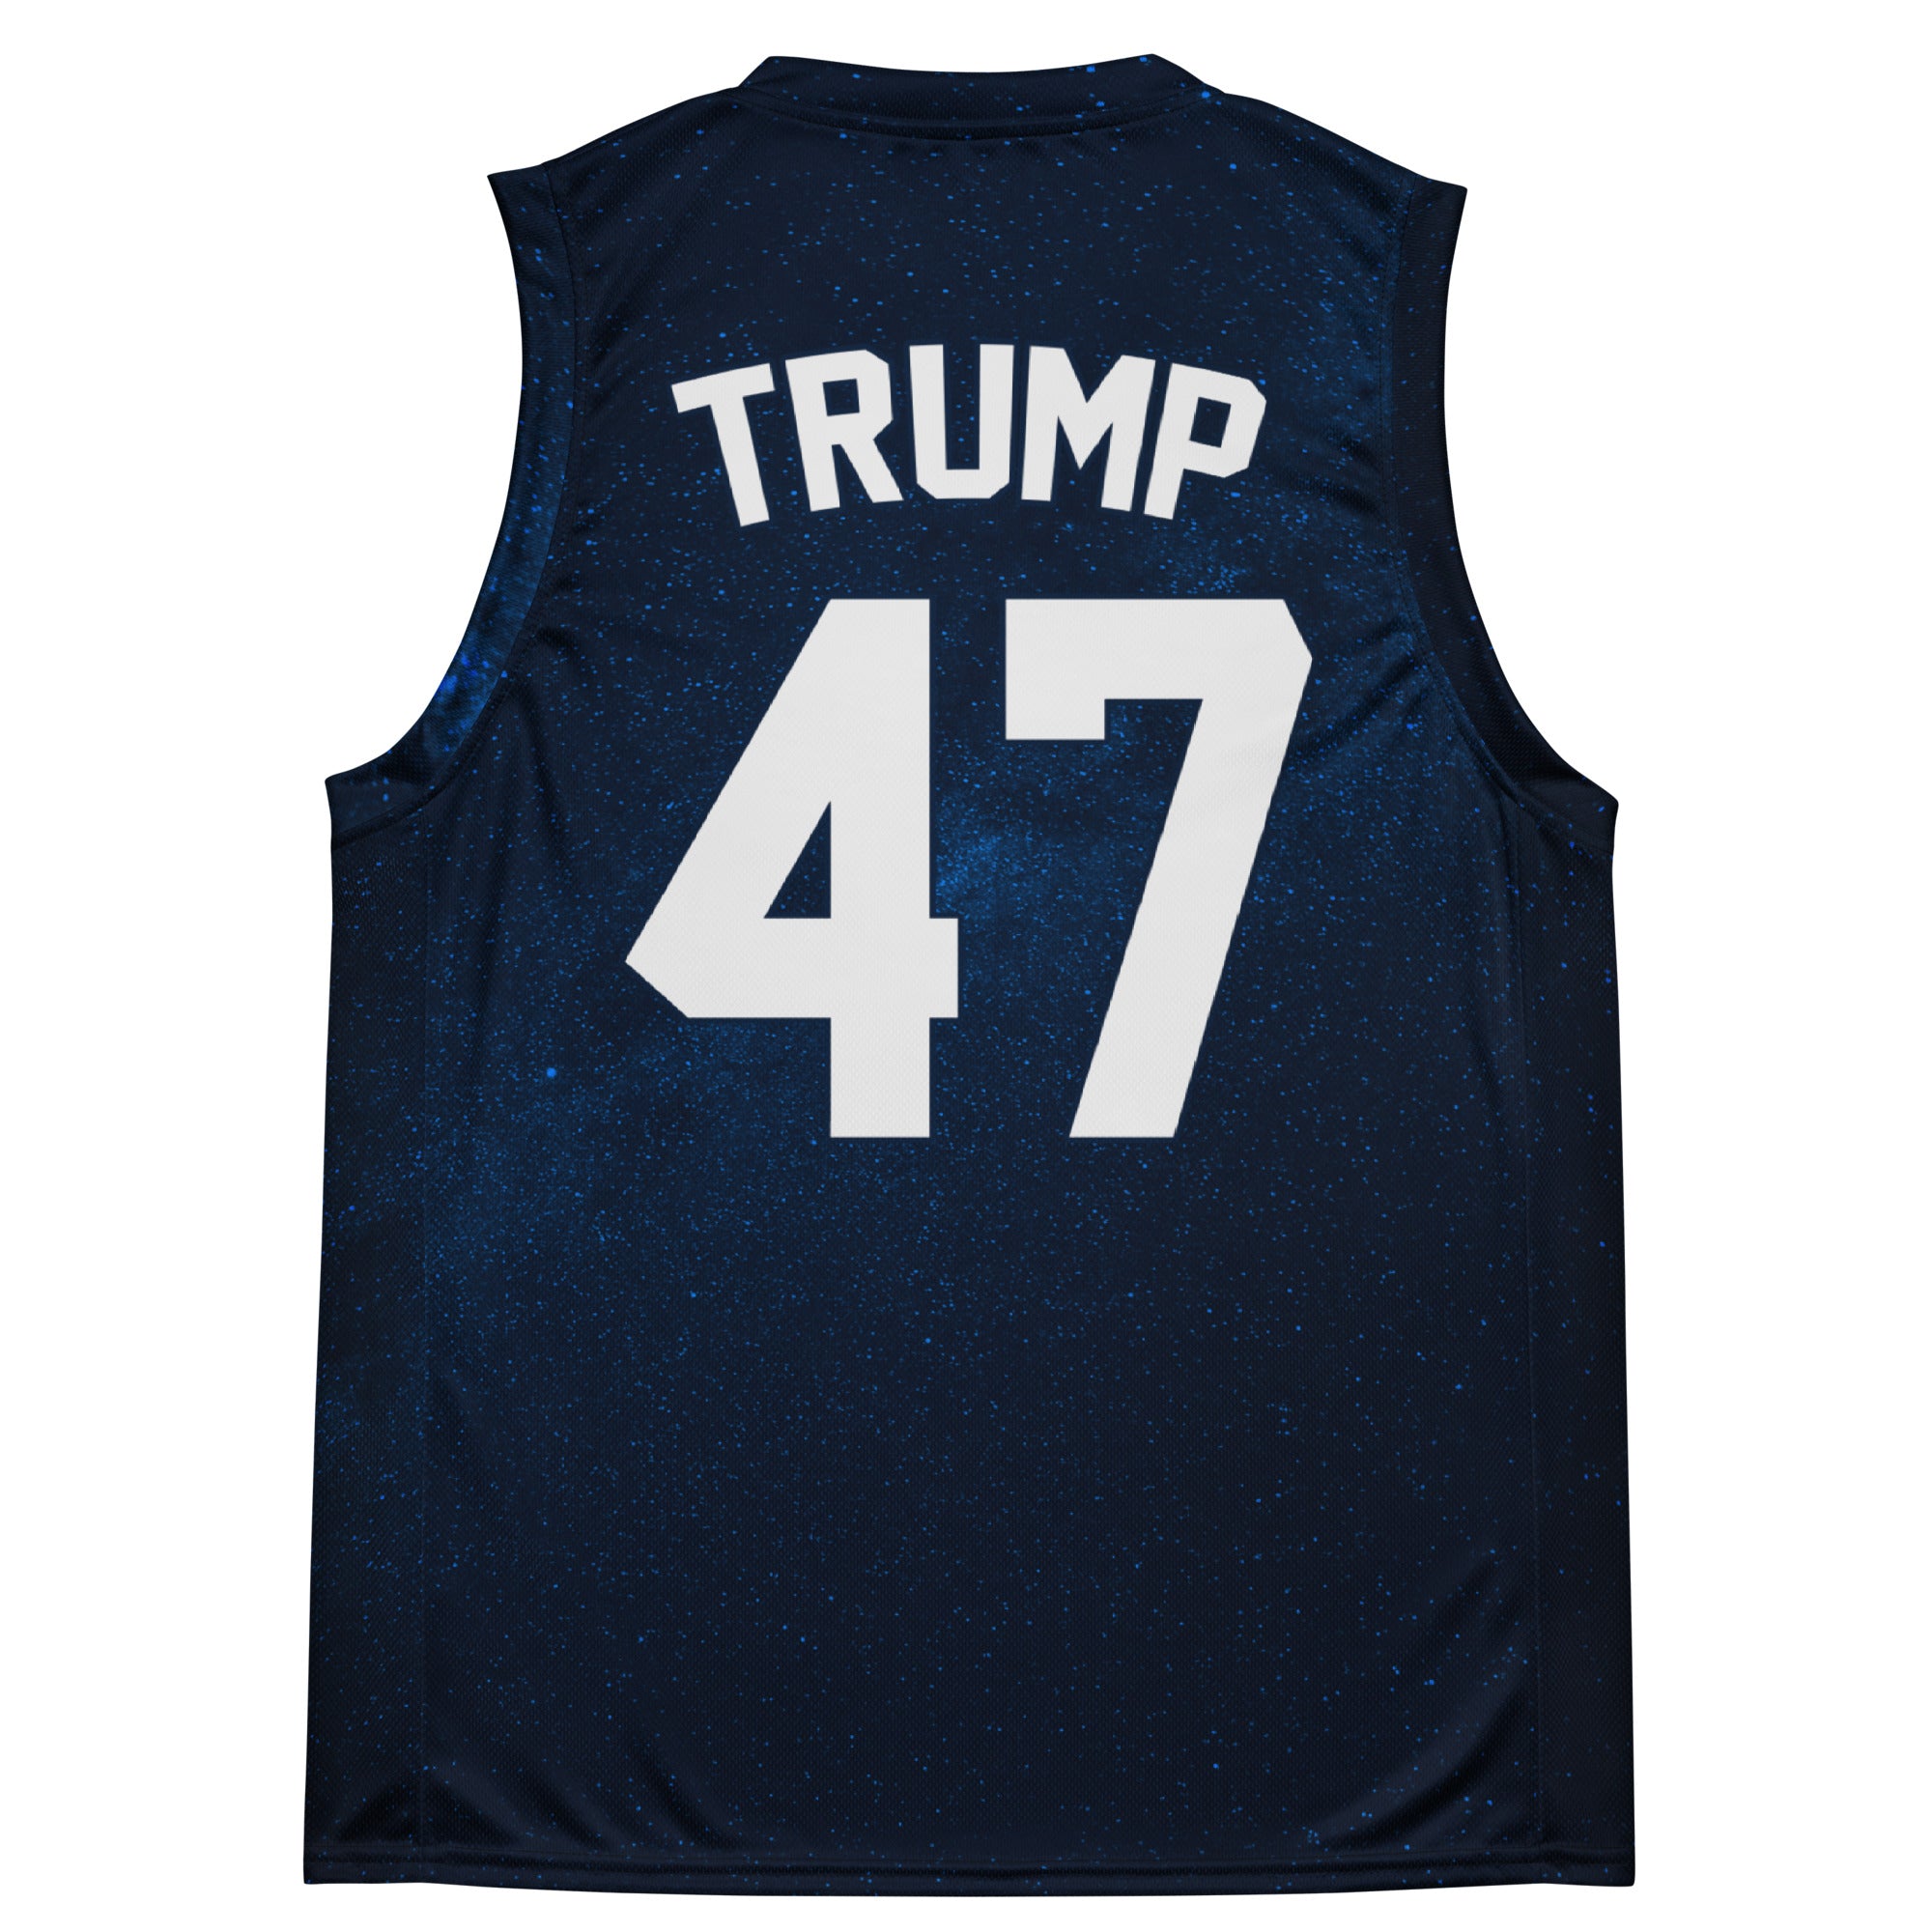 Trump #47 Outer Space Basketball Jersey - | Drunk America 